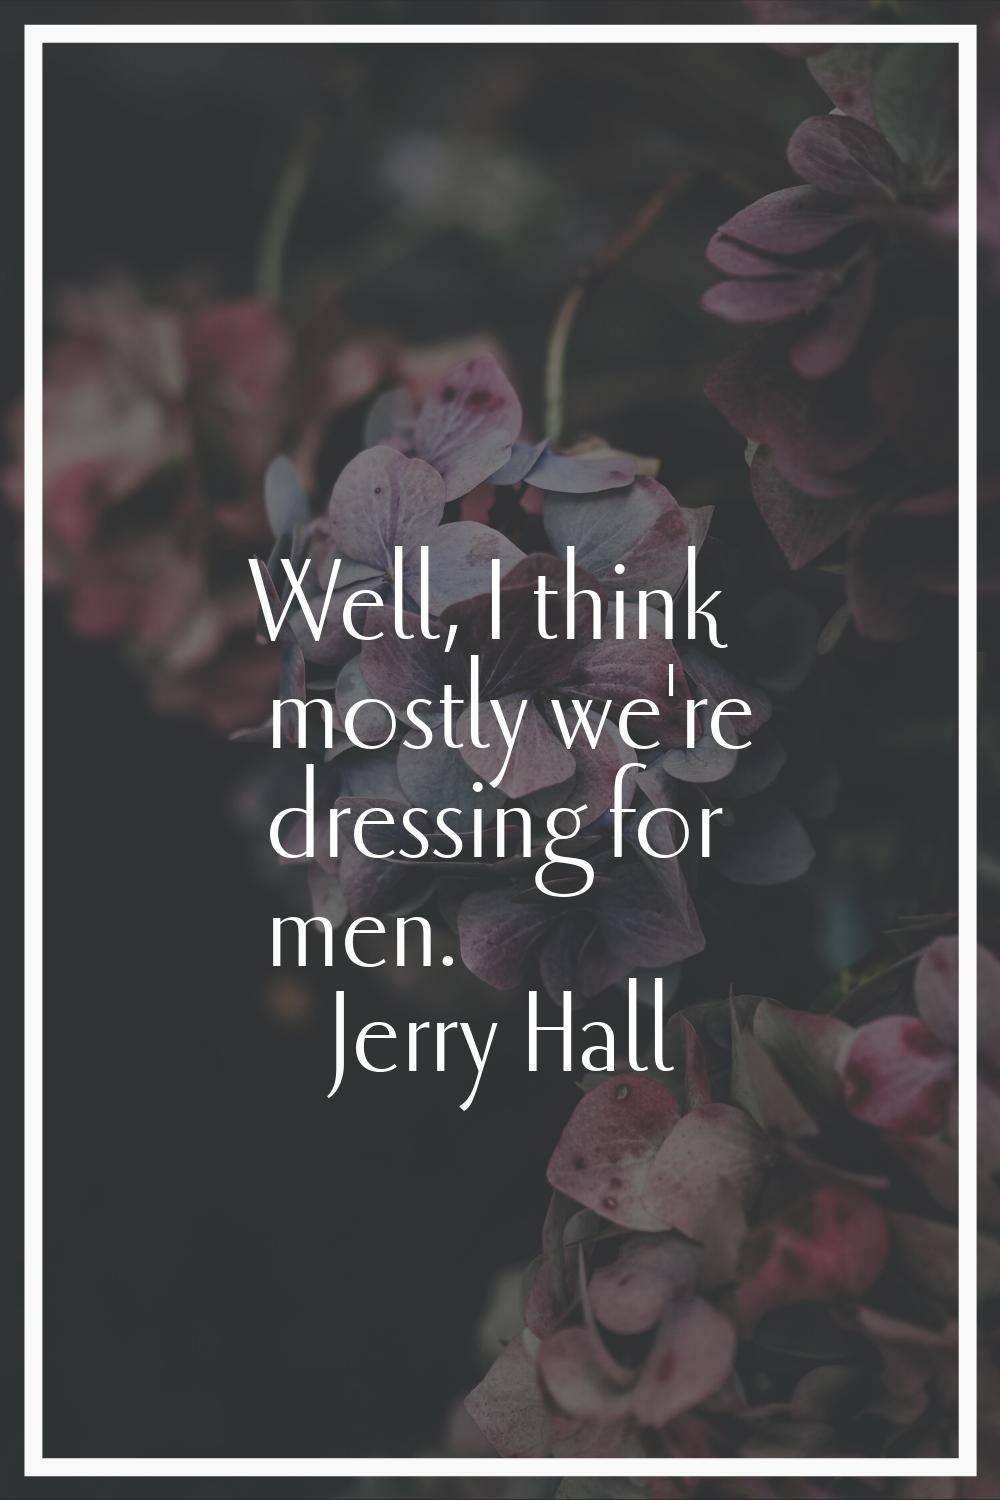 Well, I think mostly we're dressing for men.